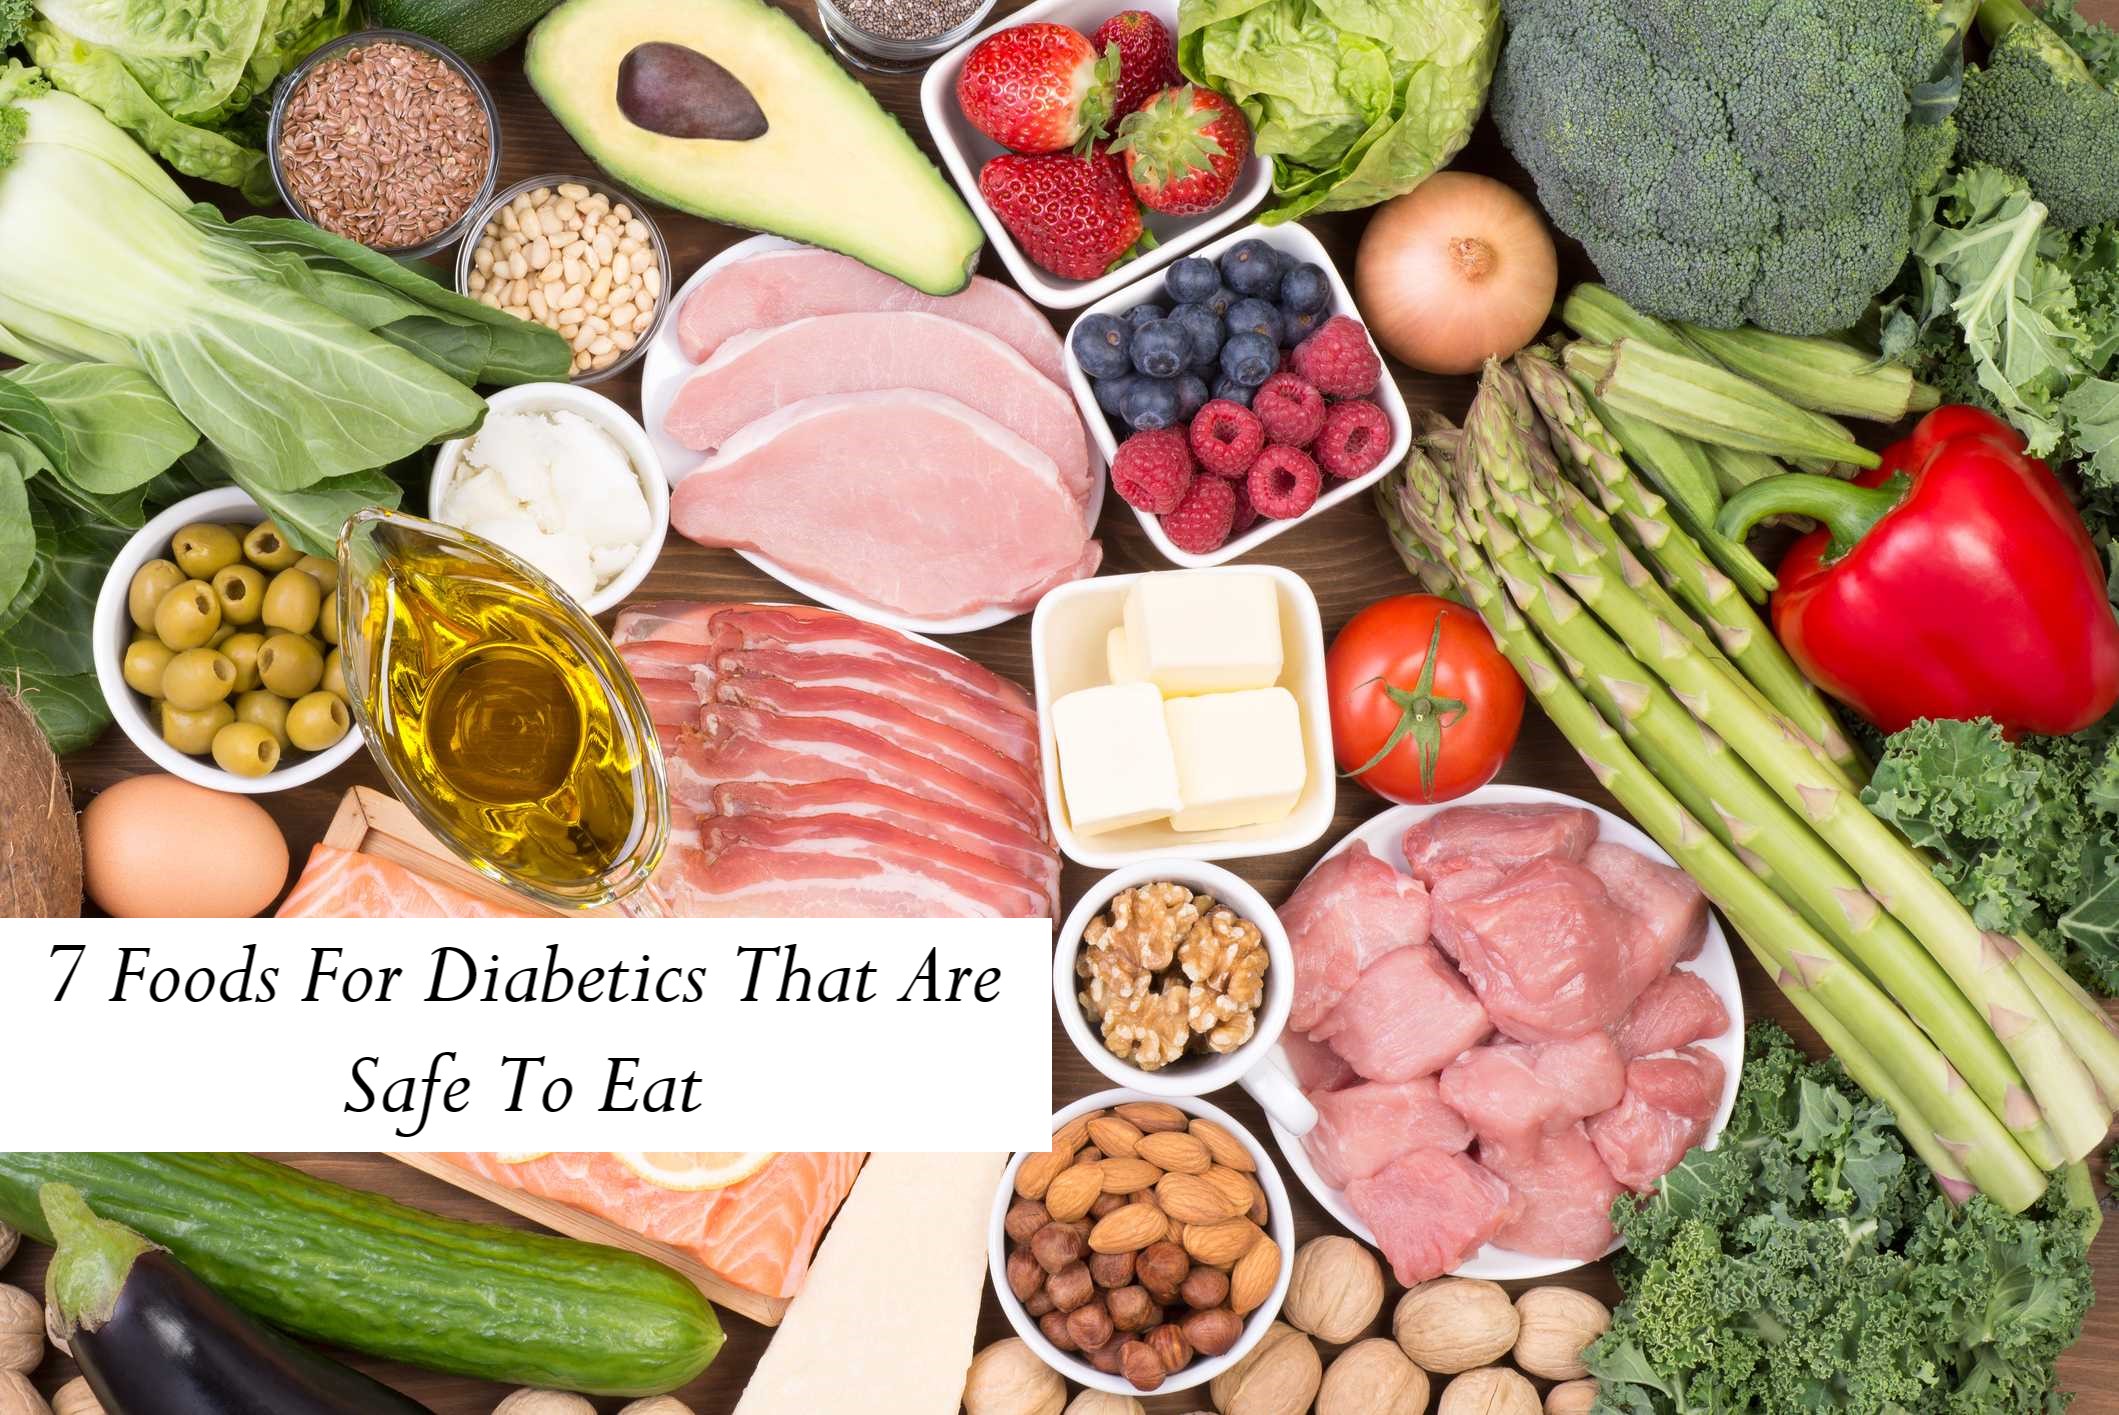 7 Foods For Diabetics That Are Safe To Eat